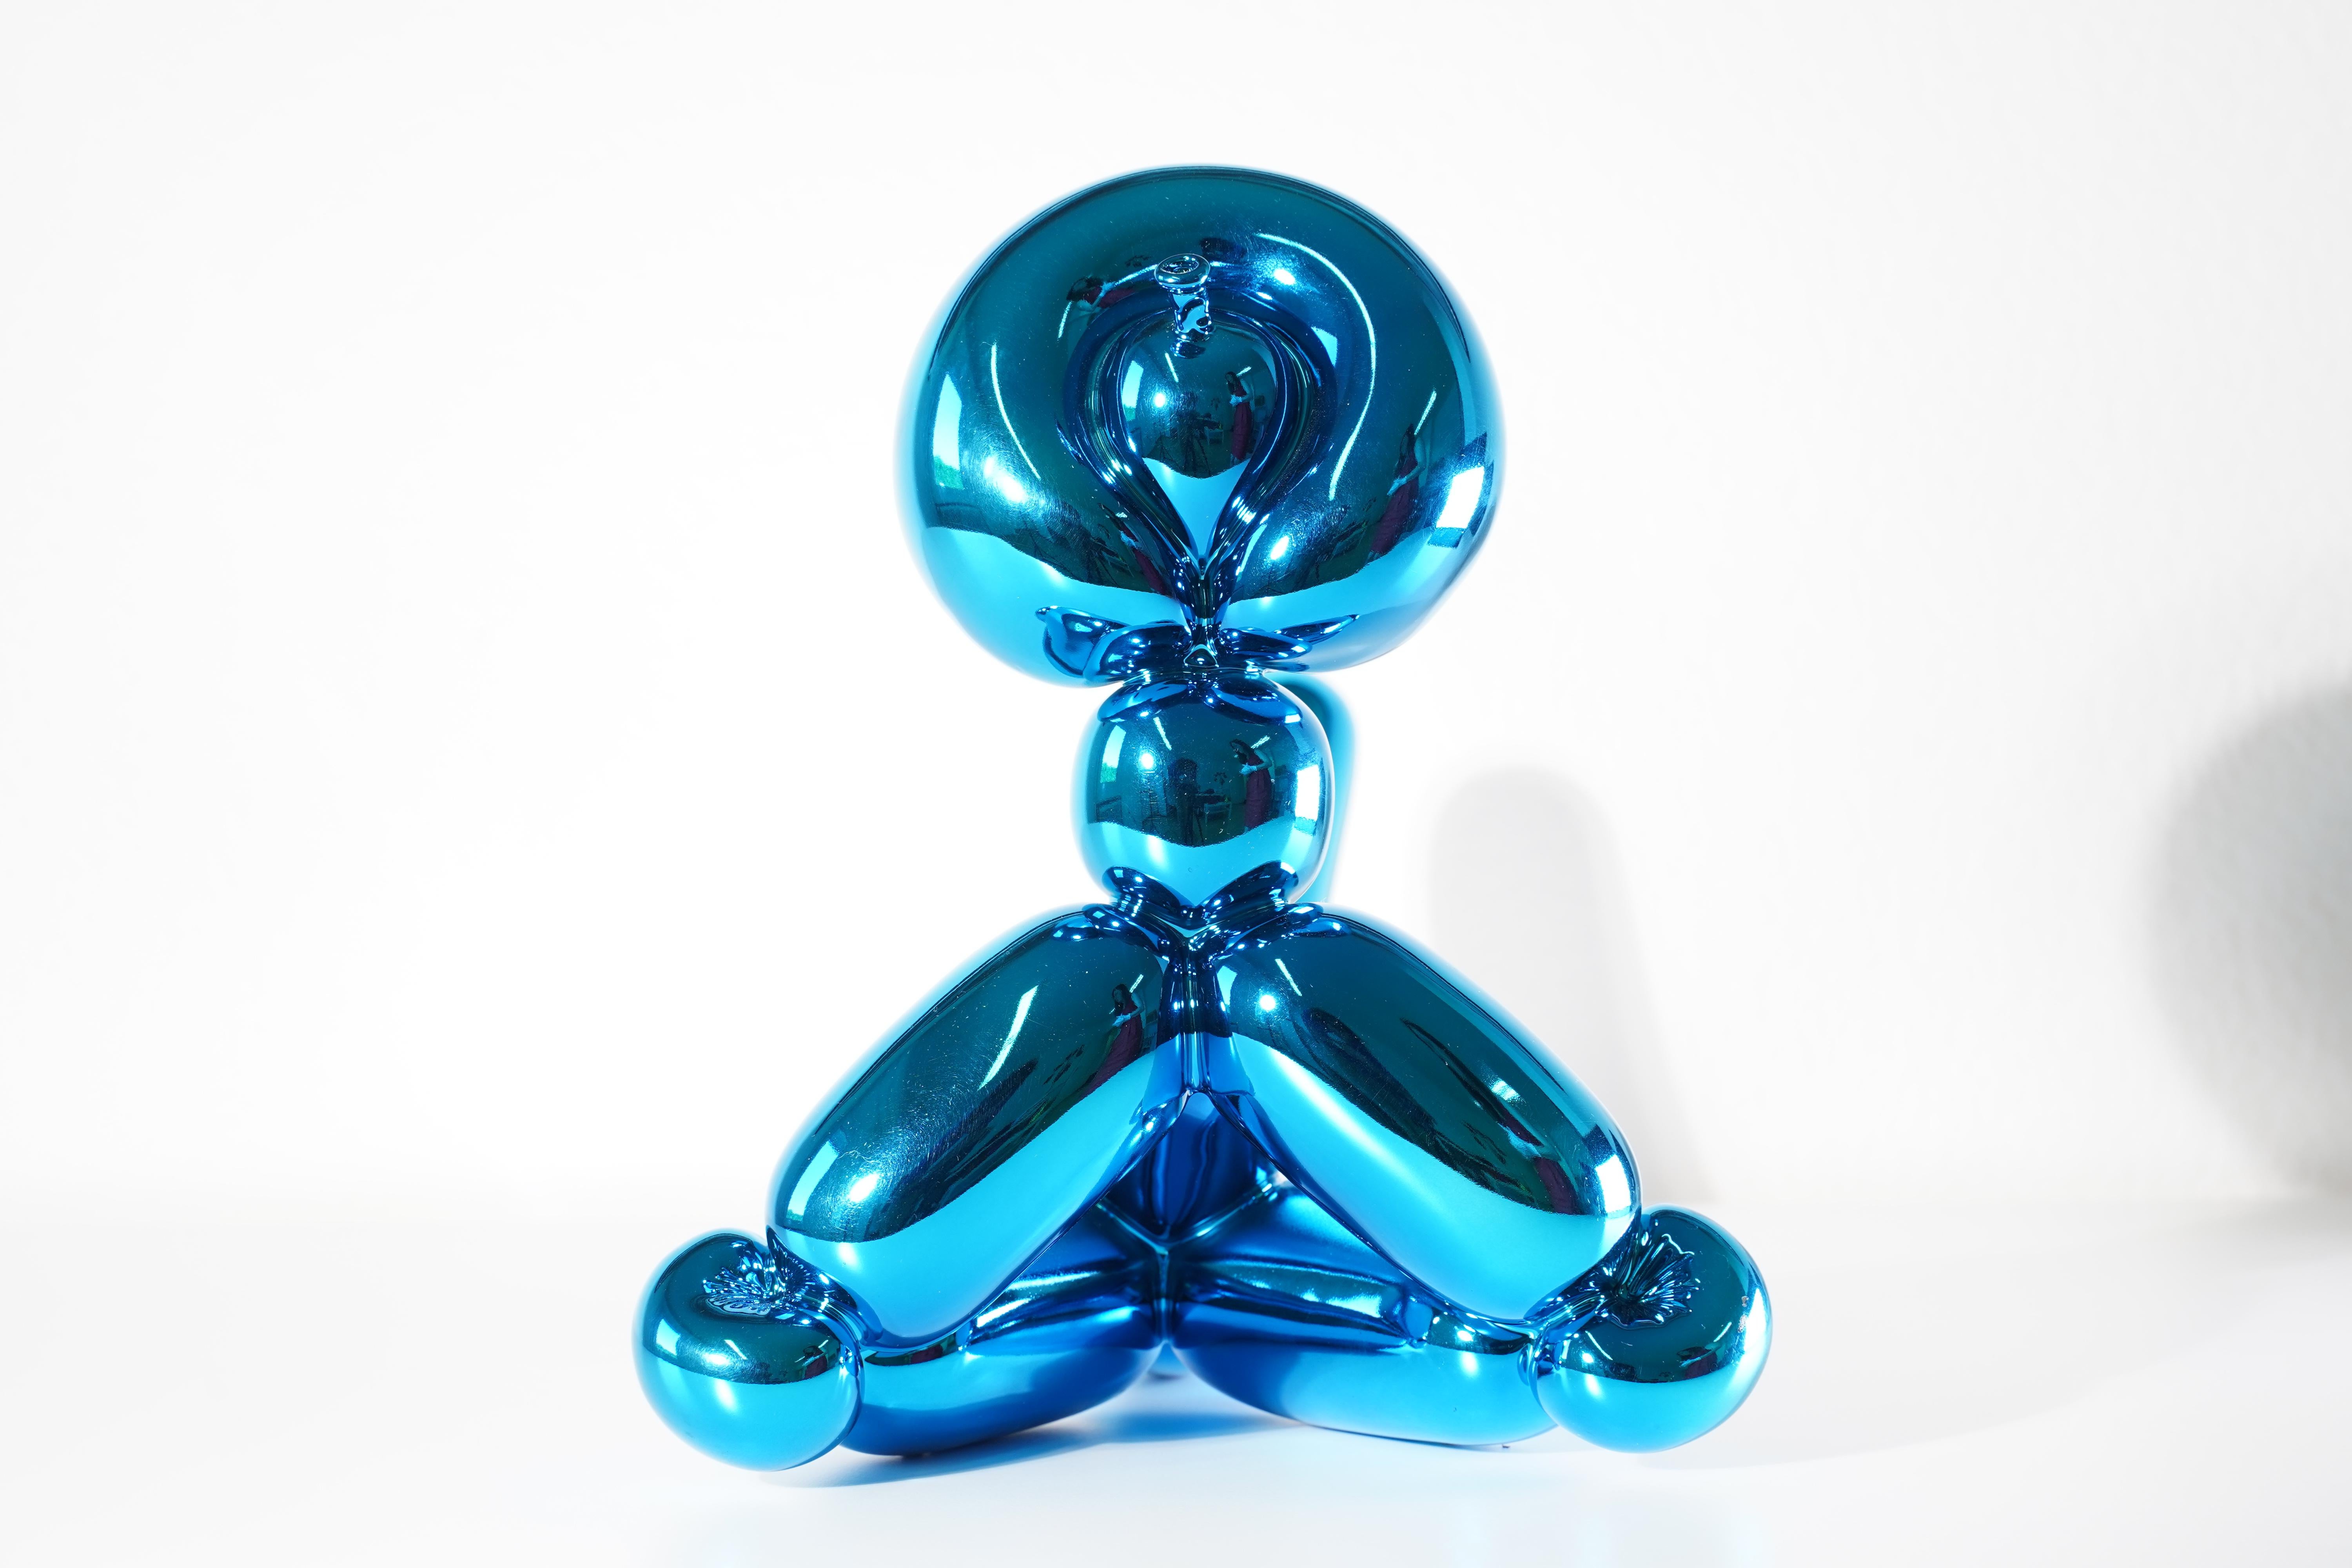 Balloon Monkey (Blue) - Jeff Koons, 21st Century, Contemporary, Porcelain, Sculpture, Decor, Limited Edition

Limoges porcelain with chromatic metalized coating
Edition of 999
Signed and numbered
In mint condition, as acquired from the